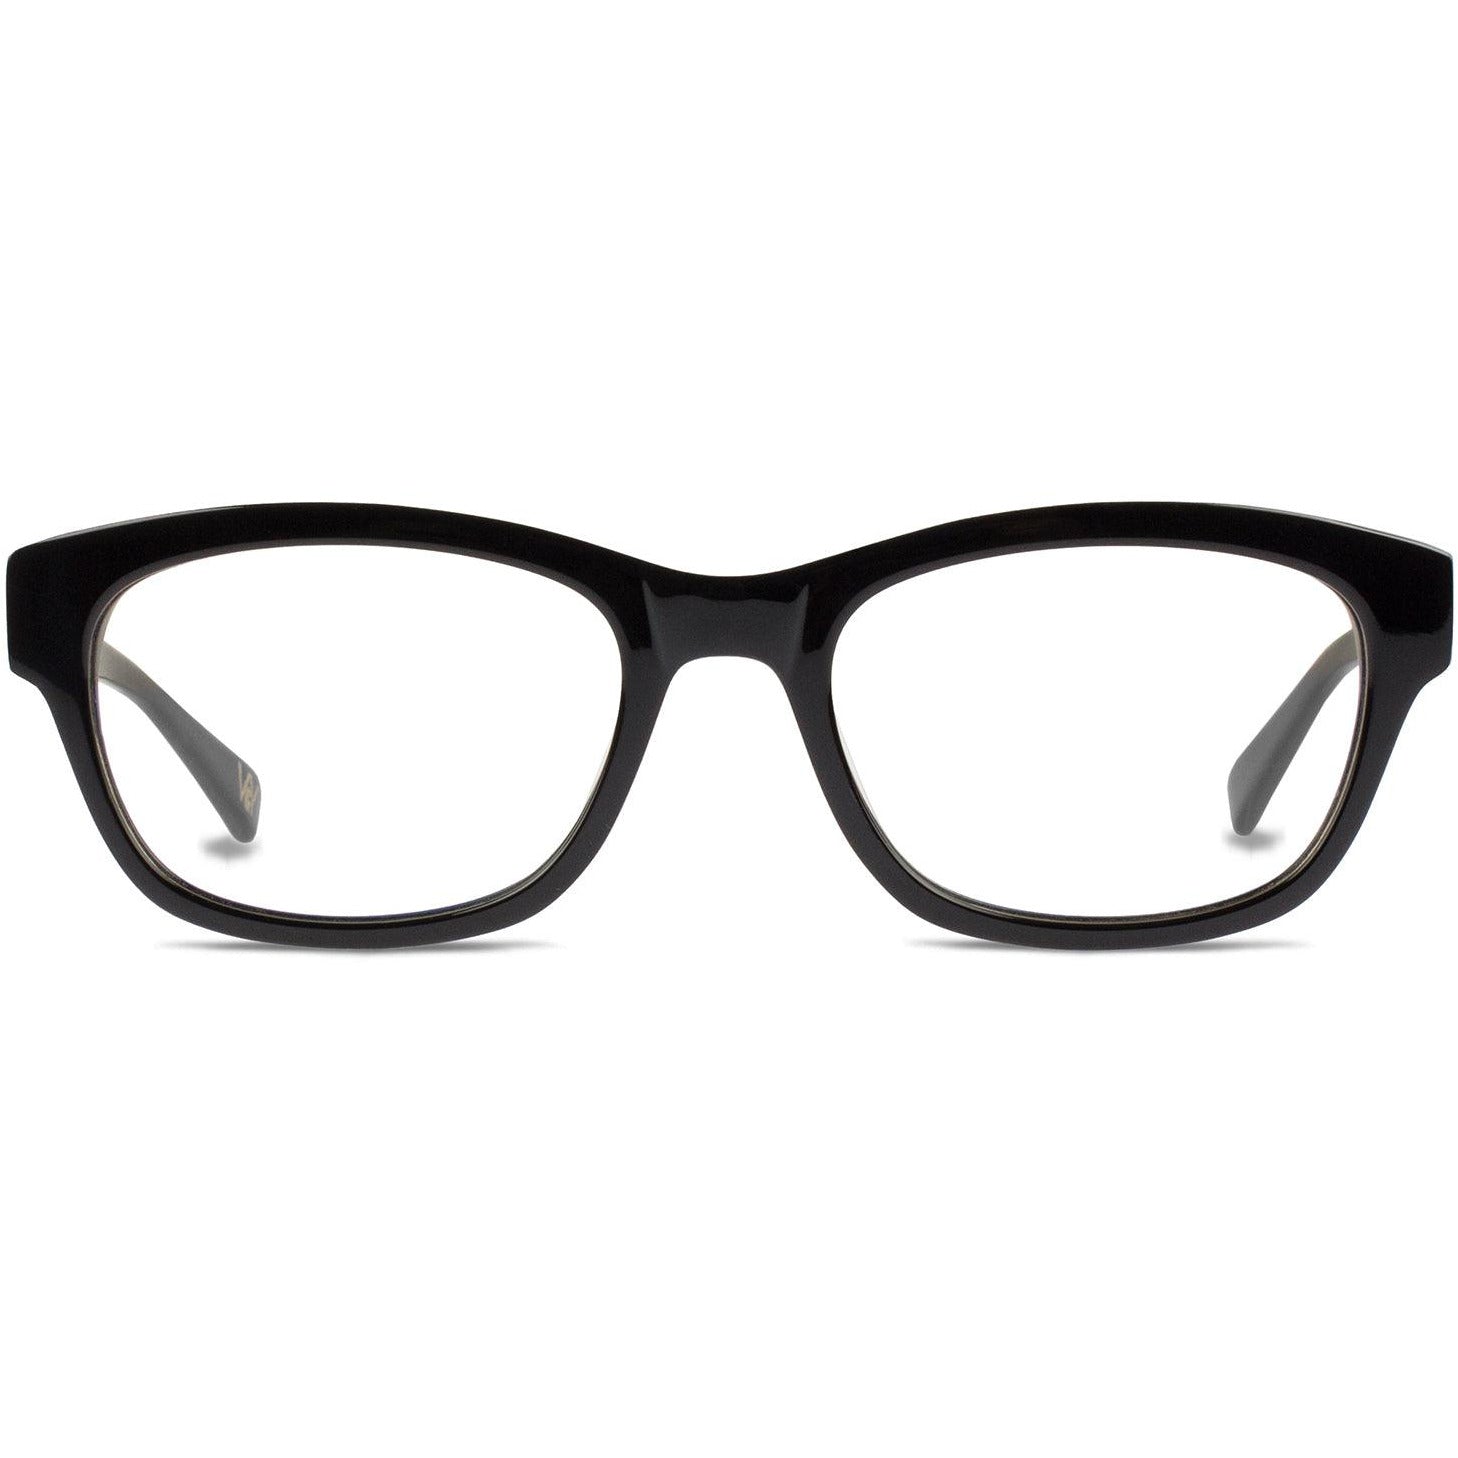 Orchid Eyeglasses | Vint and York